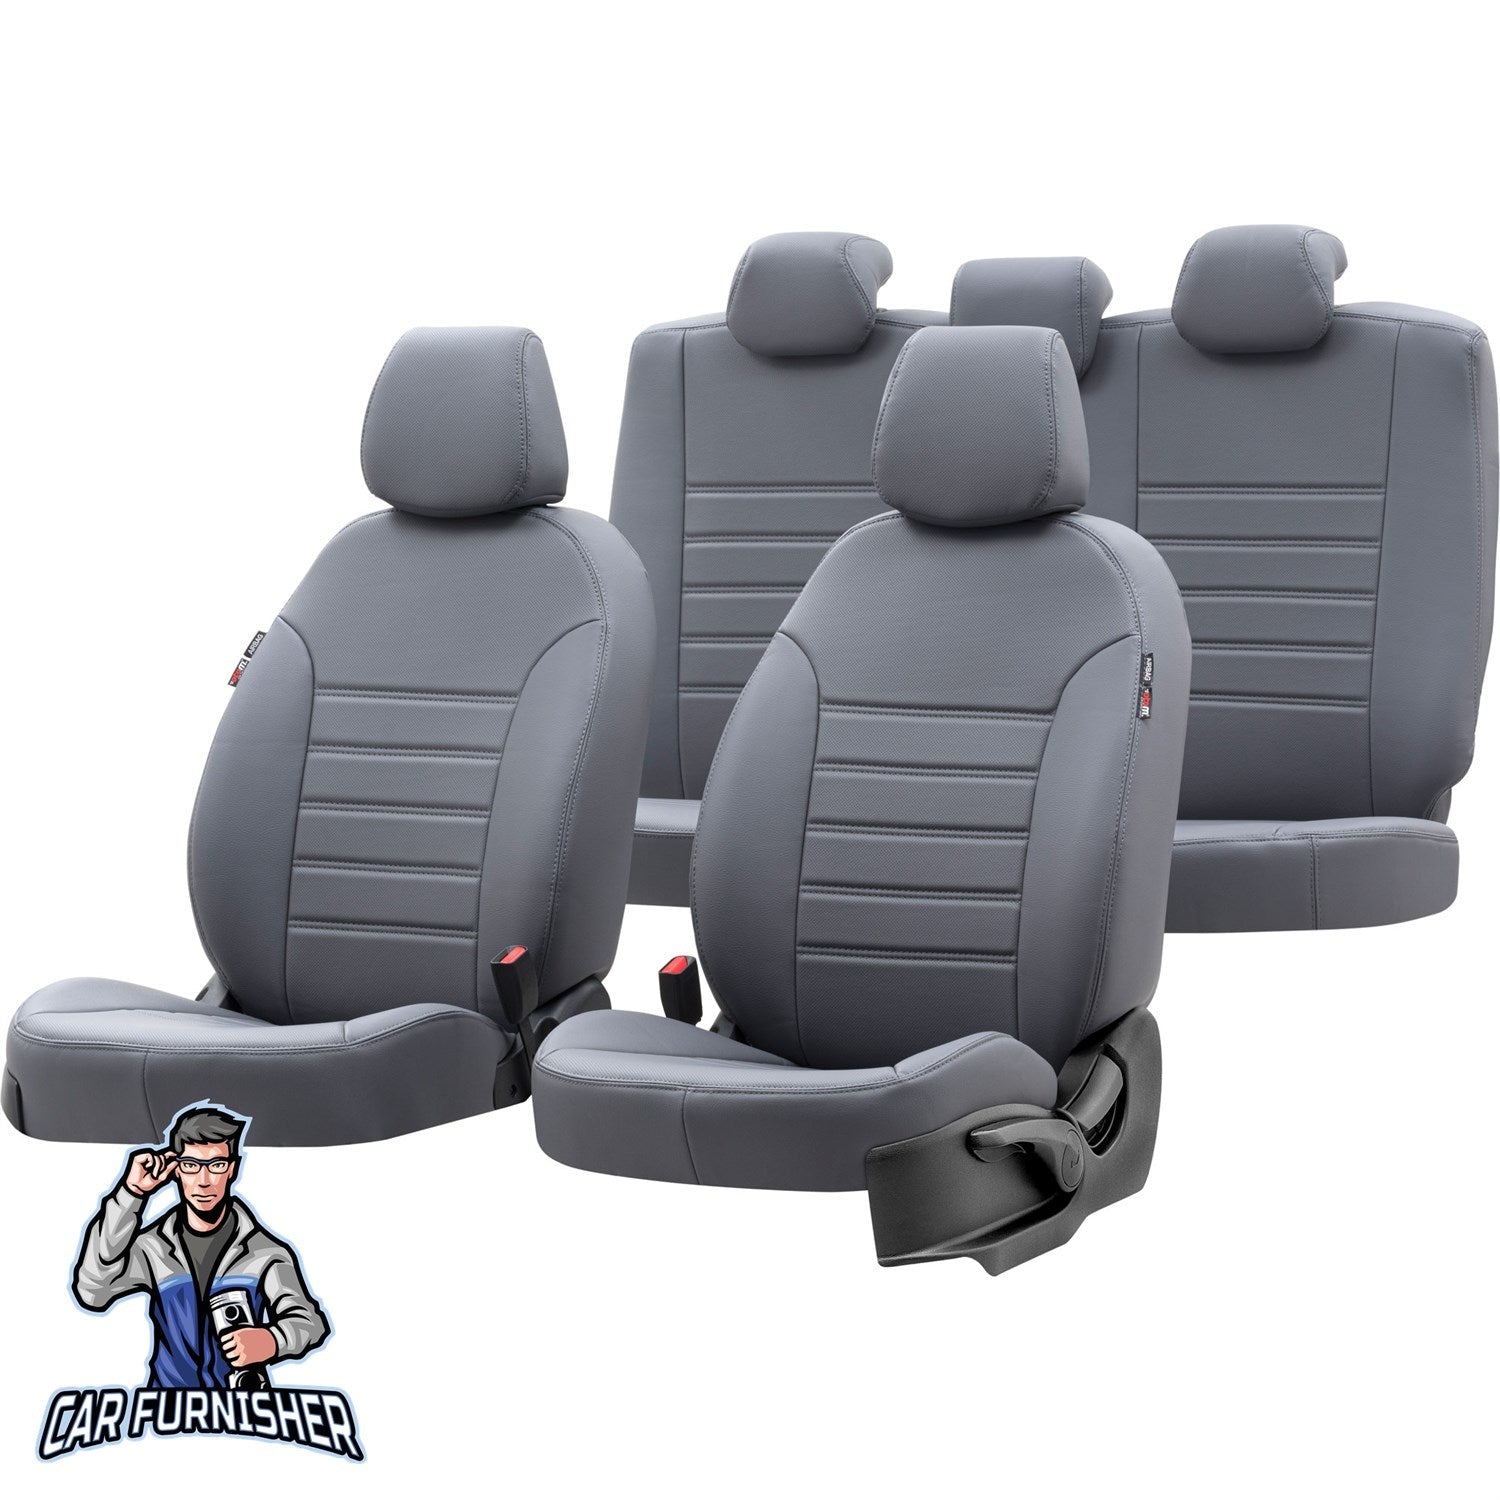 Volvo S60 Car Seat Cover 2000-2018 T4/T5/T6/T8/D5 Istanbul Design Smoked Full Set (5 Seats + Handrest) Leather & Fabric